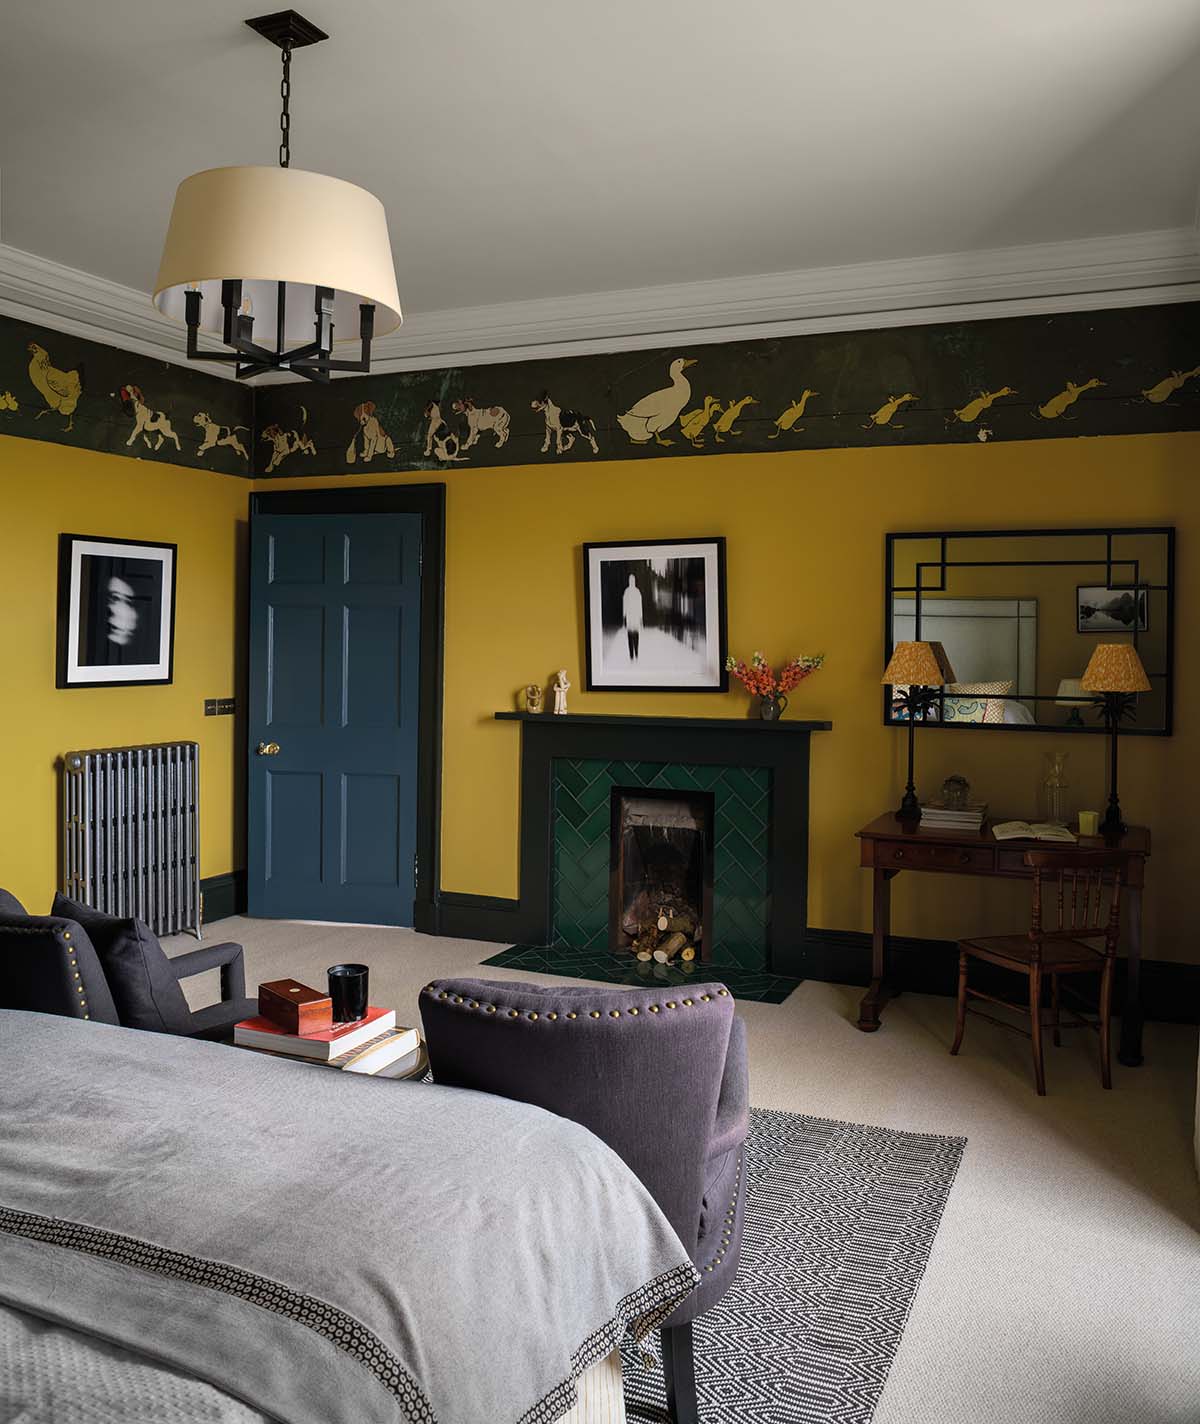 bedroom with yellow walls and a duck and duckling patterned border around the top of the room